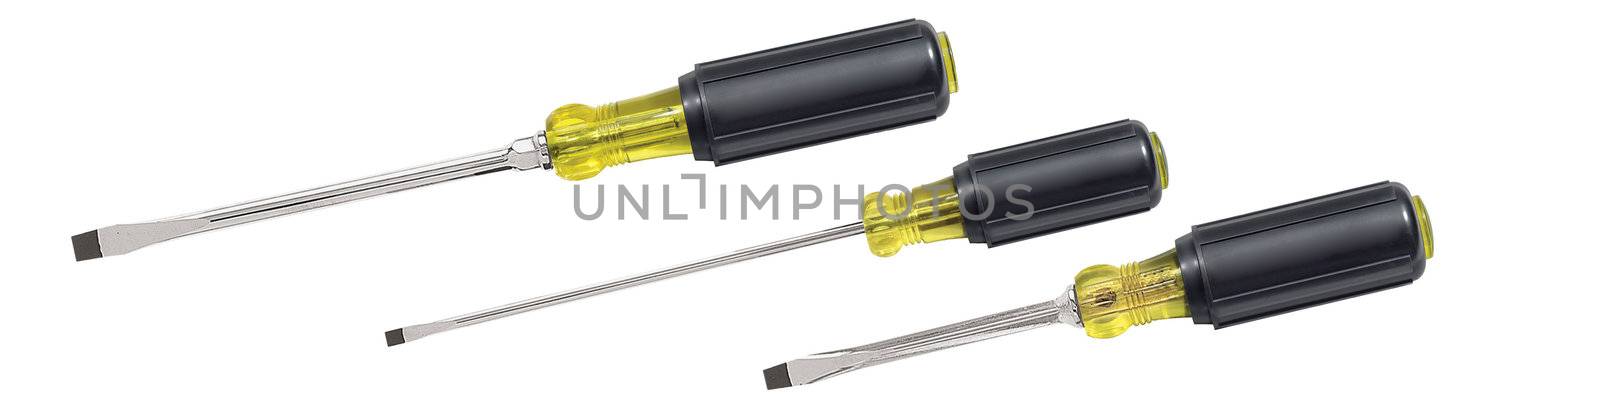 Three Screwdrivers isolated on a white background